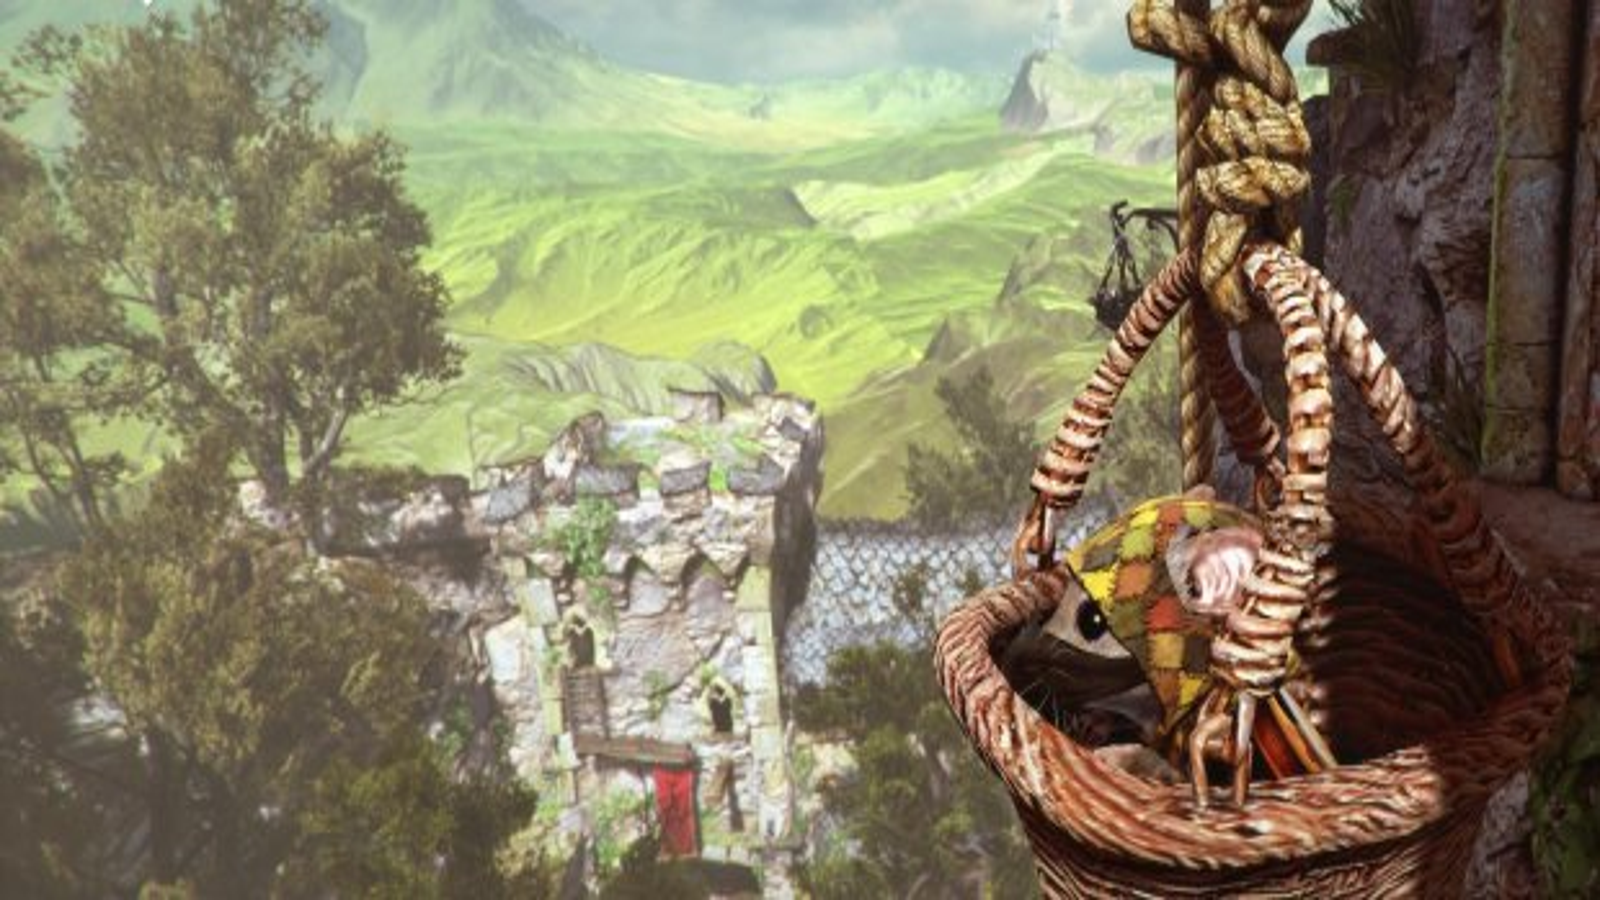 Adorable mouse-based action RPG Ghost of a Tale is out today on Steam